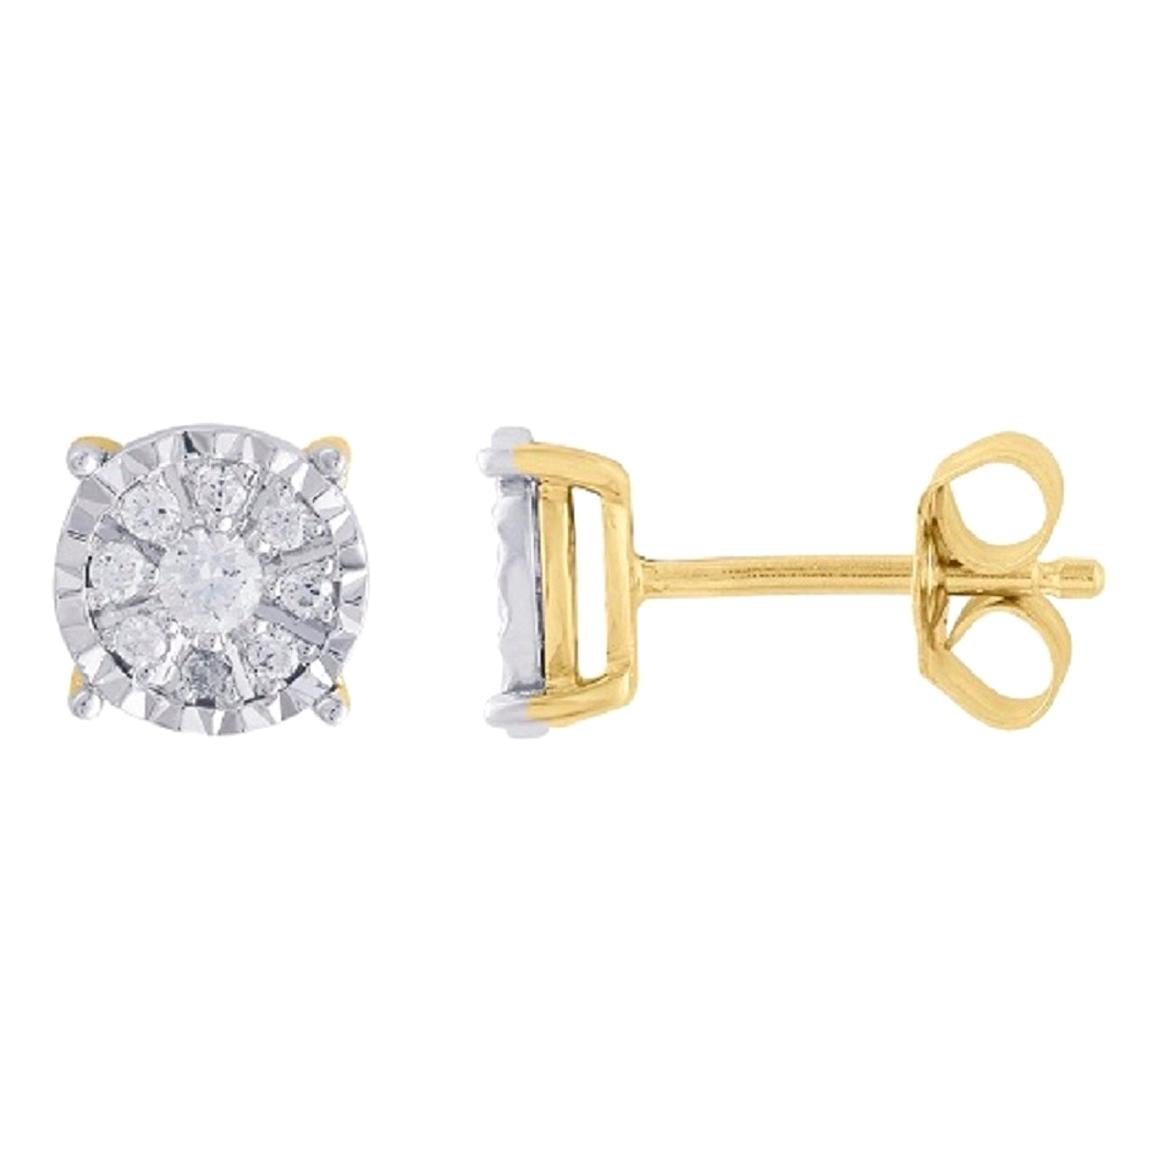 TJD 0.23 Carat Round Diamond 14K Yellow Gold Miracle Plate Cluster Stud Earrings